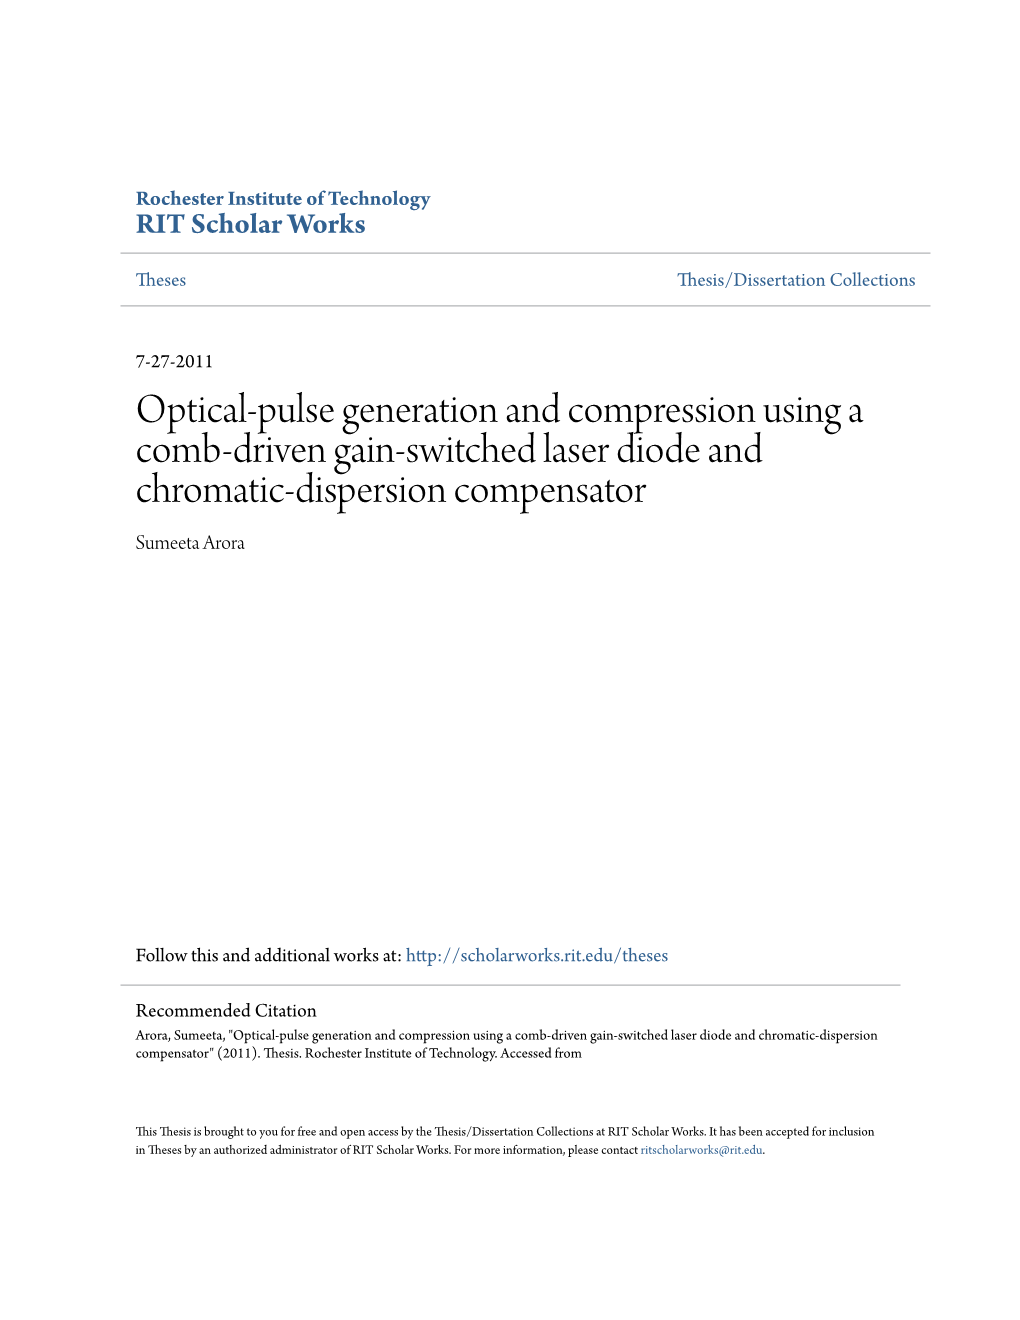 Optical-Pulse Generation and Compression Using a Comb-Driven Gain-Switched Laser Diode and Chromatic-Dispersion Compensator Sumeeta Arora